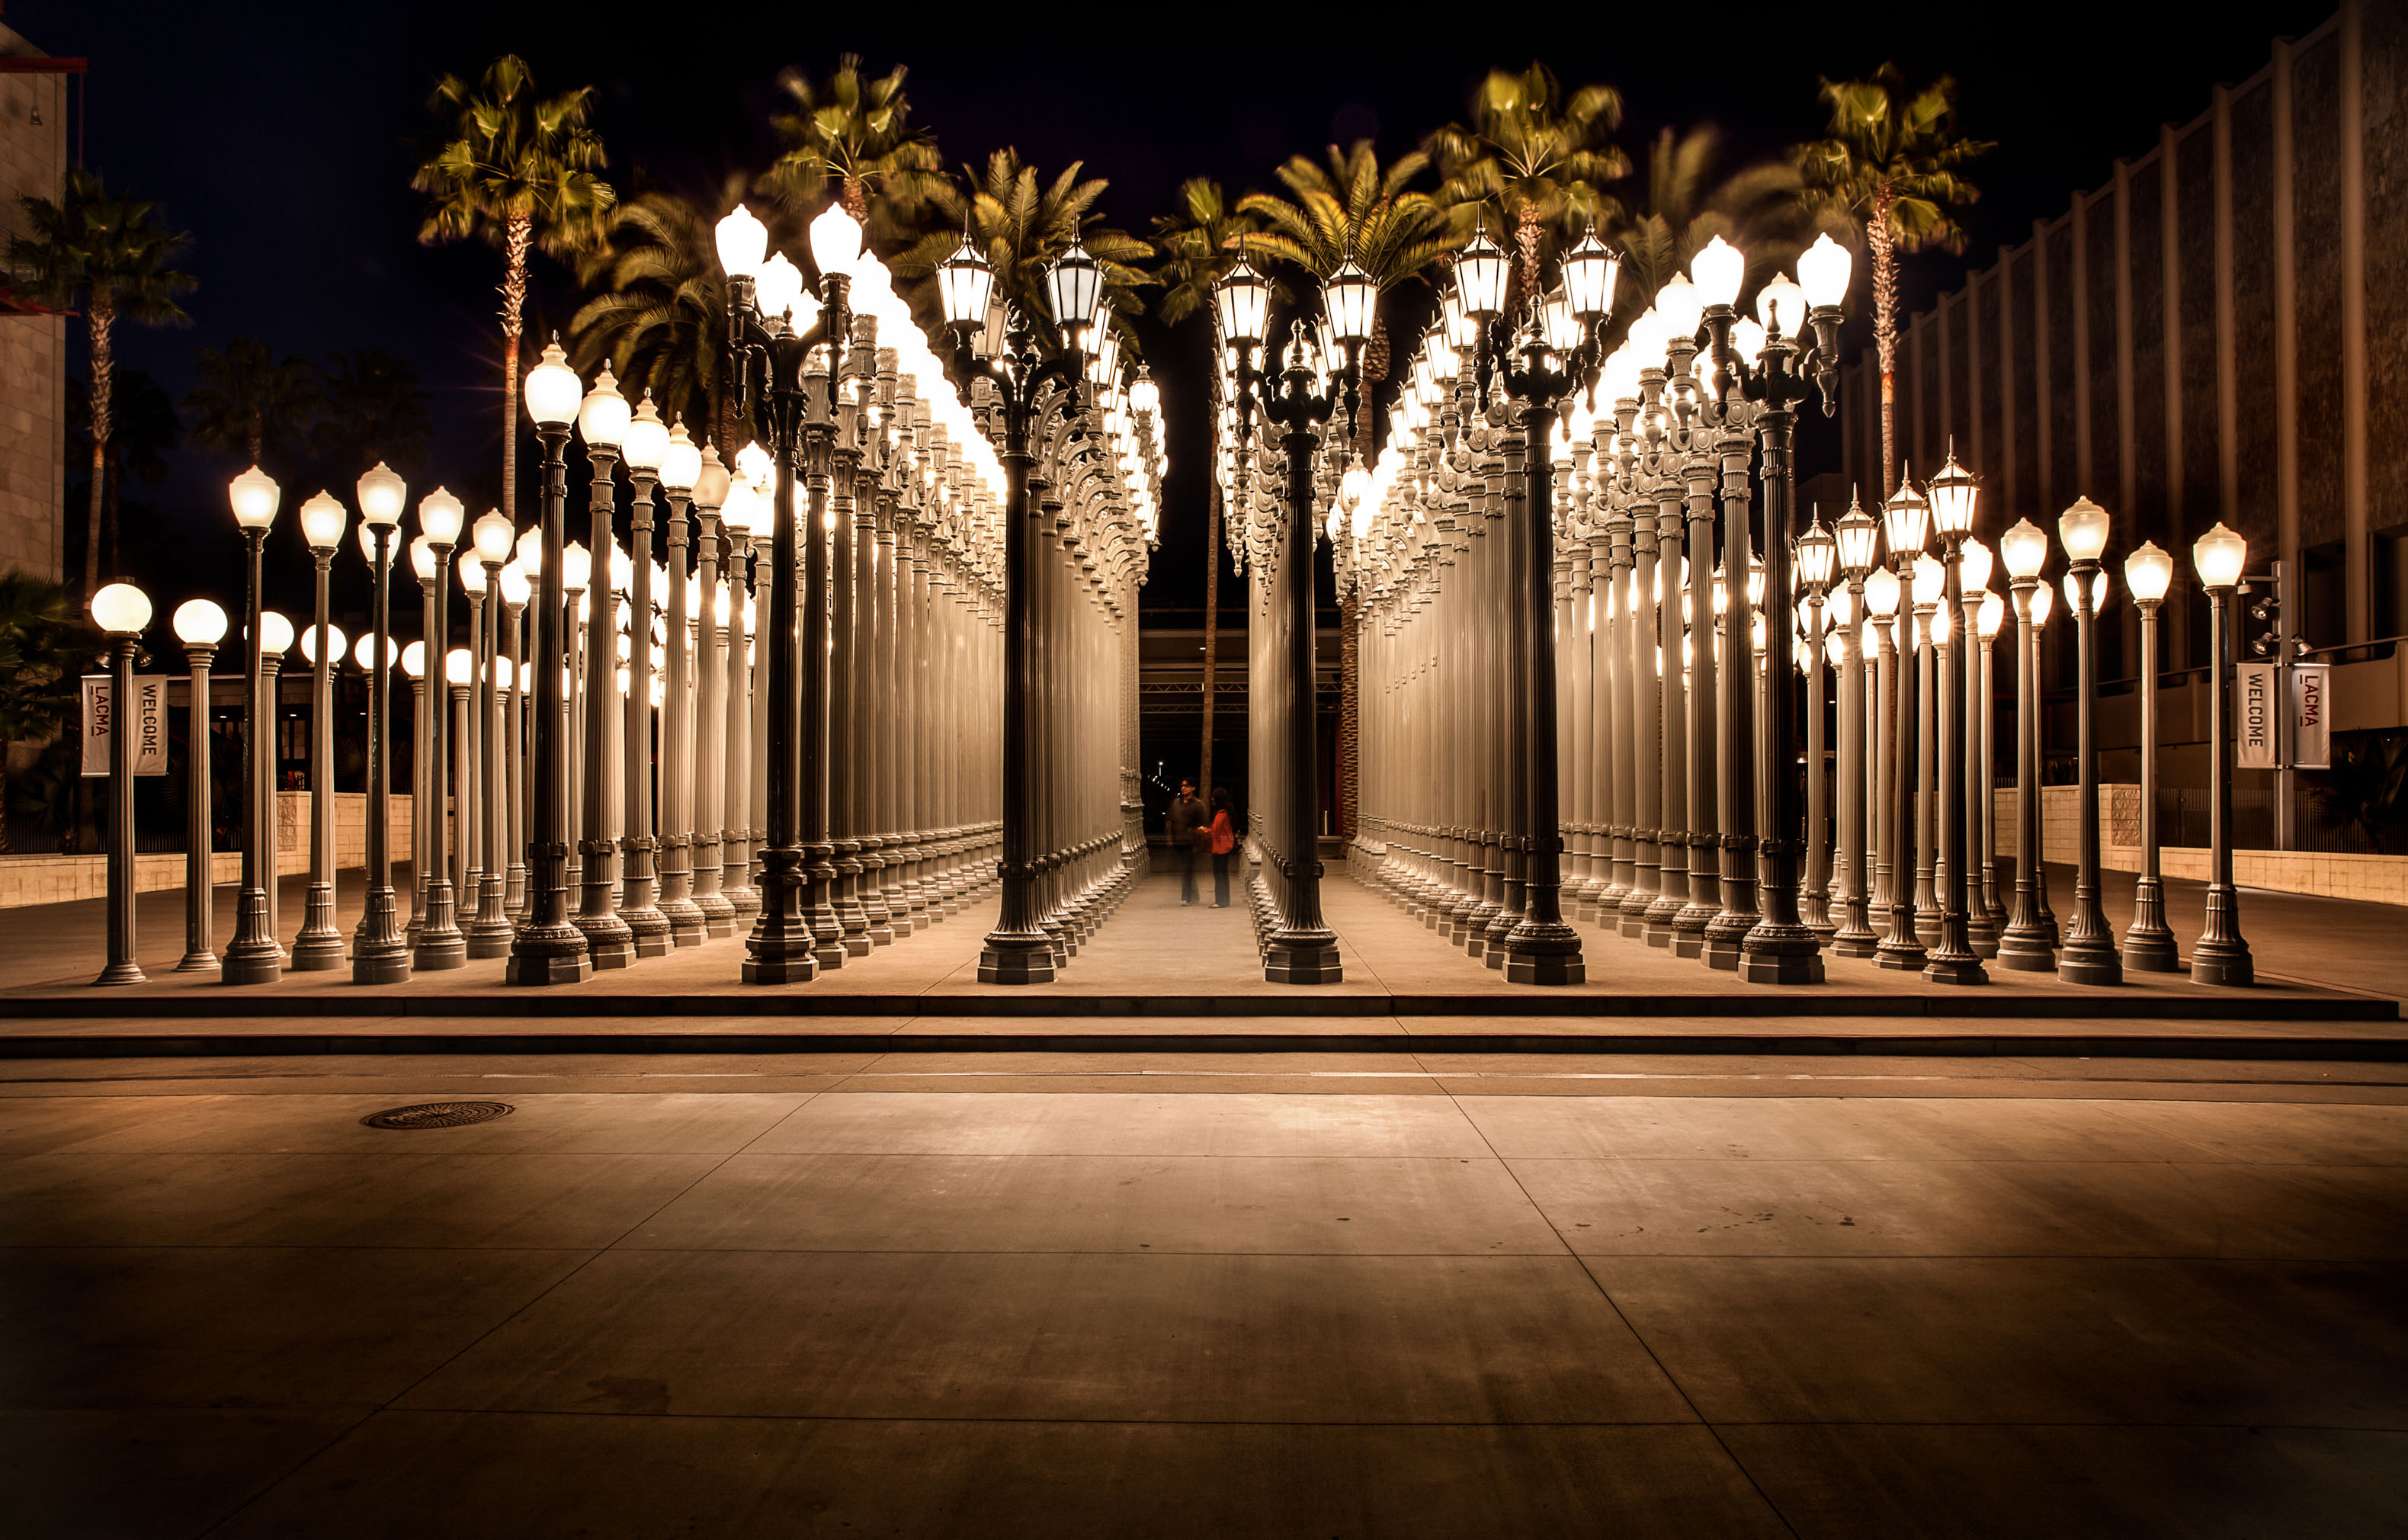 E0EY75 Urban Light by Chris Burden, Los Angeles County Museum of Art on Wilshire Boulevard.. Image shot 2013. Exact date unknown.